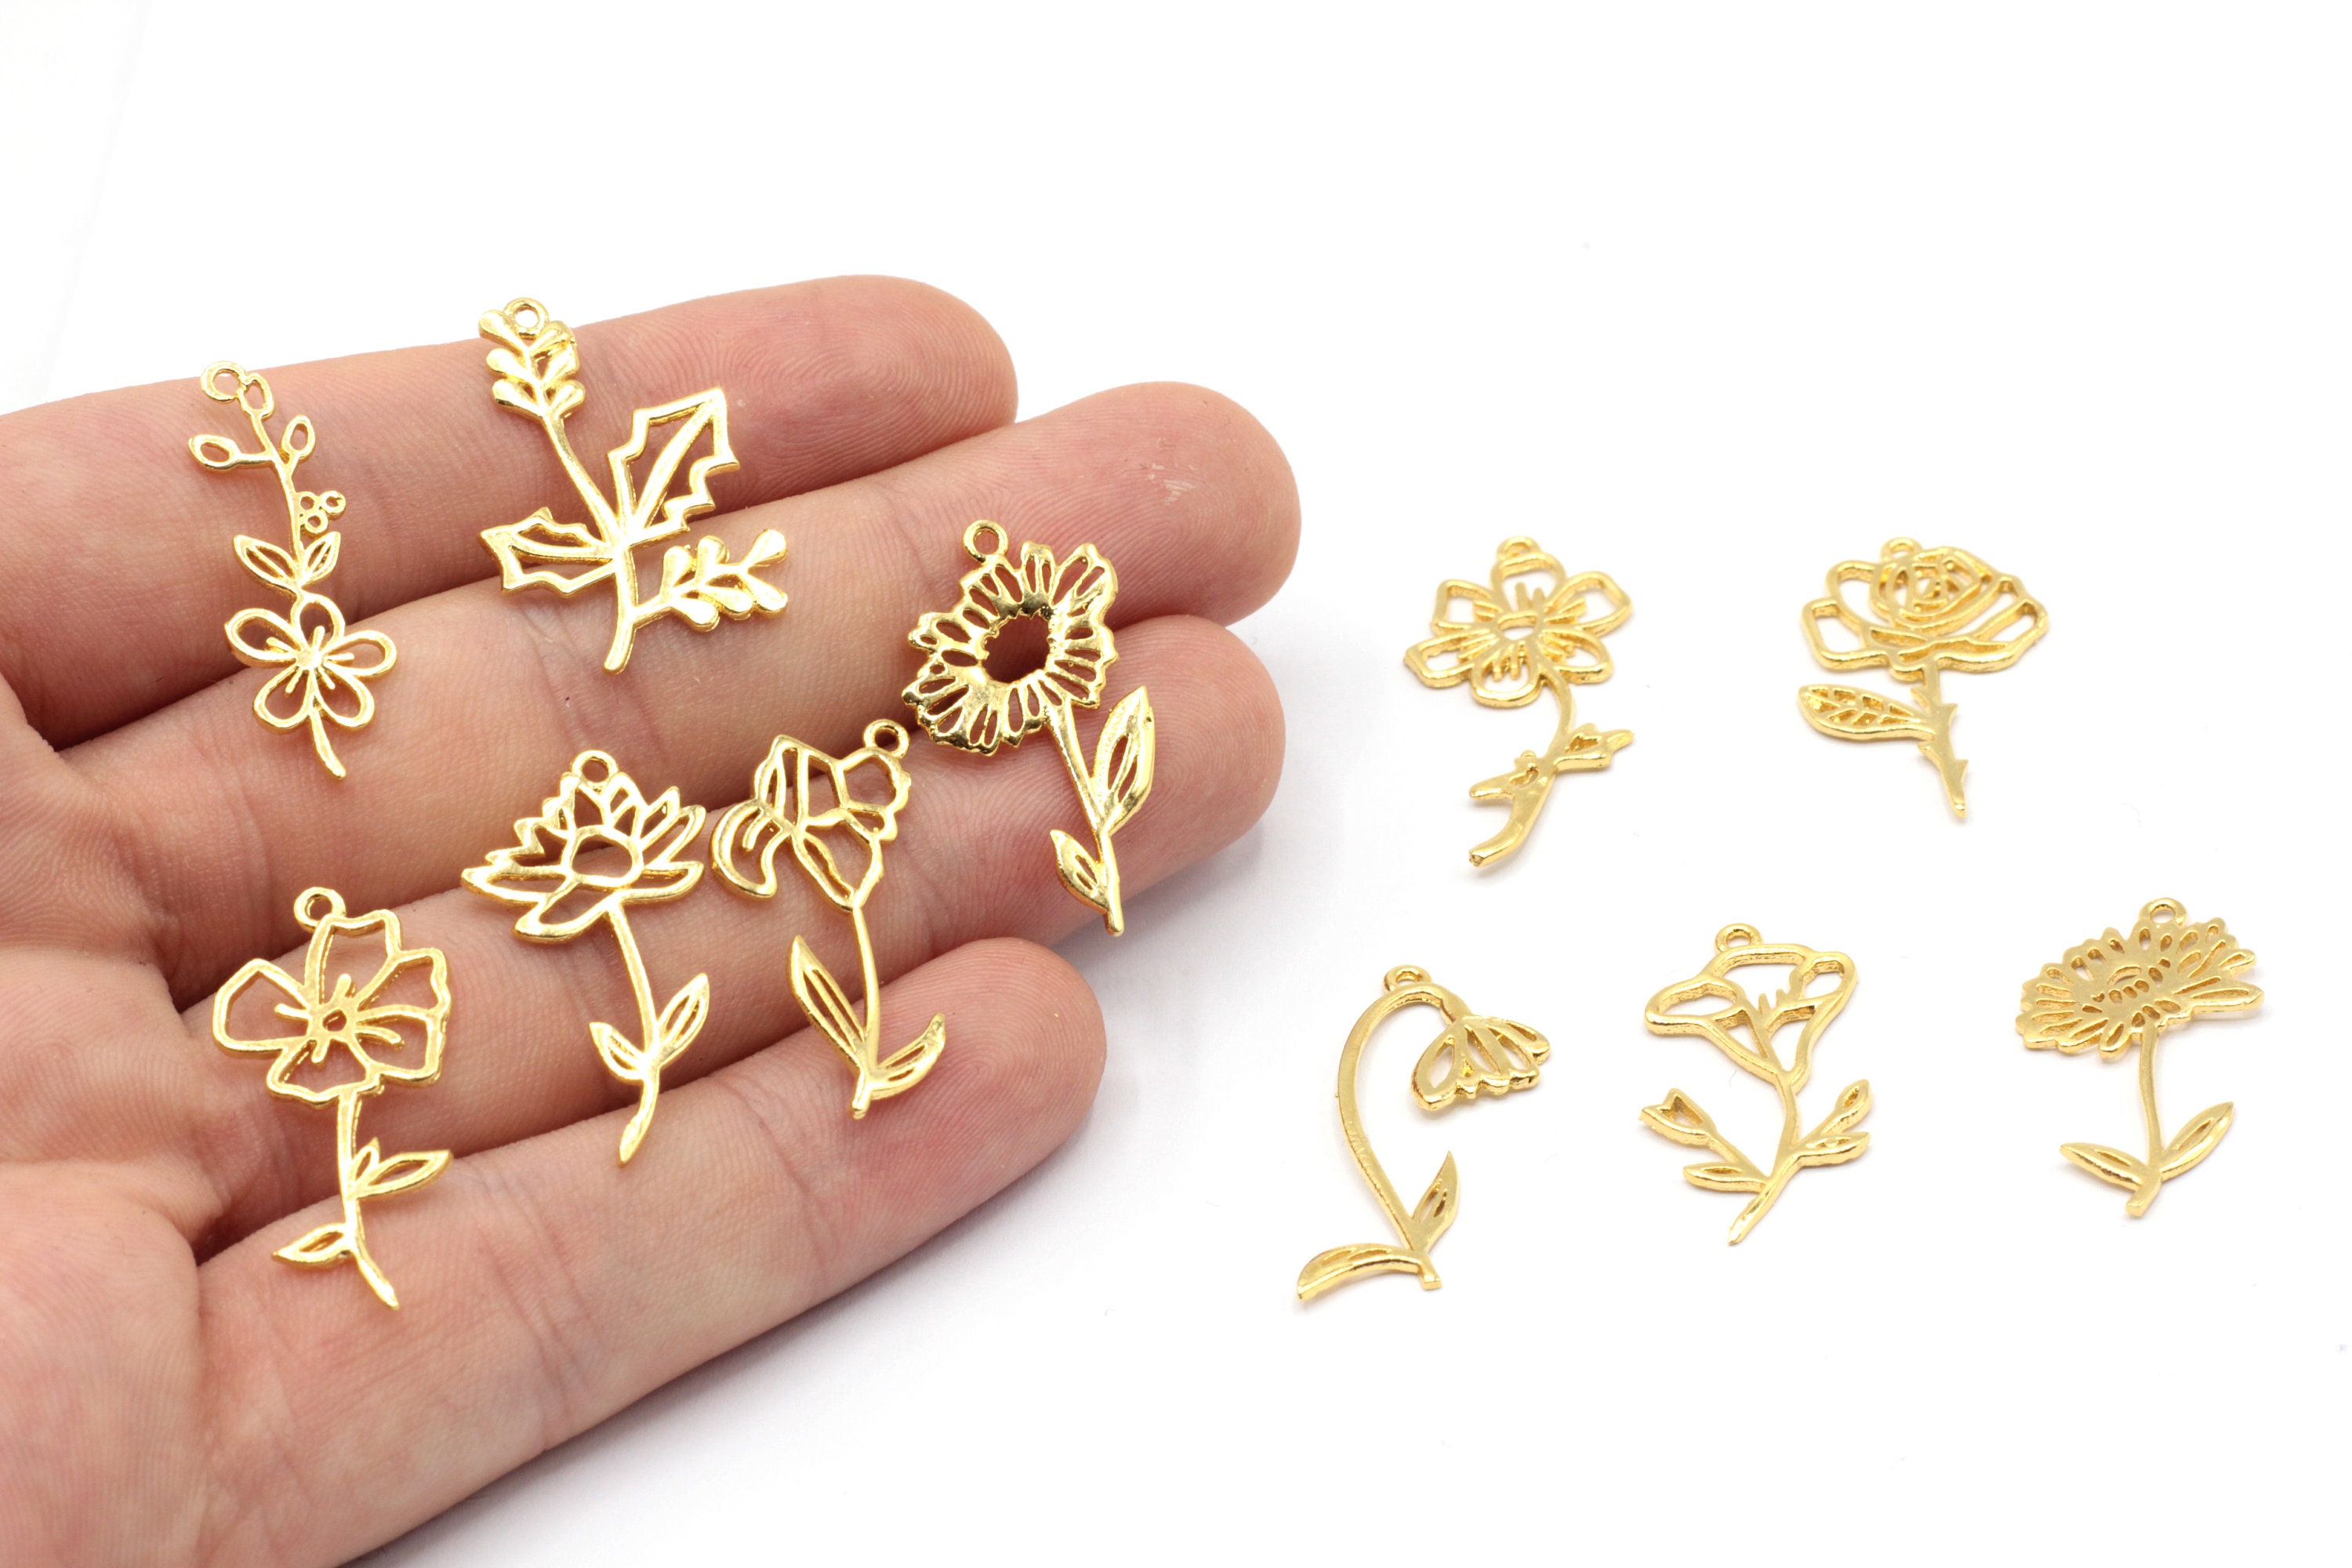 Joez Wonderful 50pcs Flower Charms for Jewelry Making, Acrylic Floral  Earring Jewelry Charms Pendants Leaf Beads for DIY Crafts Necklaces  Earrings